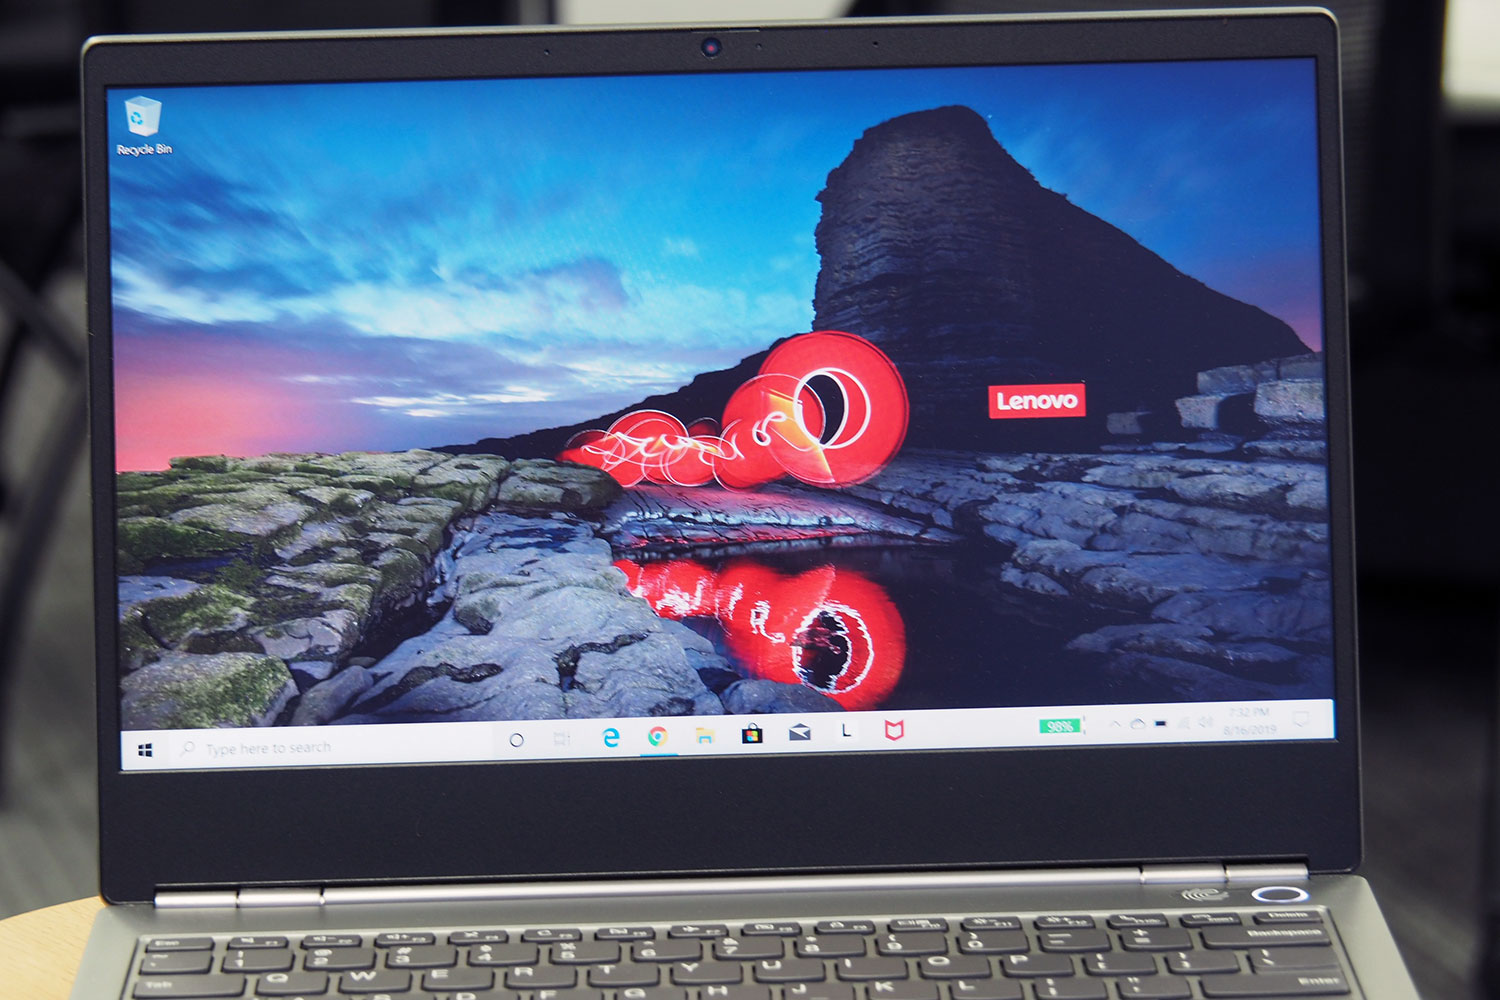 Lenovo ThinkBook 13s Review: Where's the Business? | Digital Trends